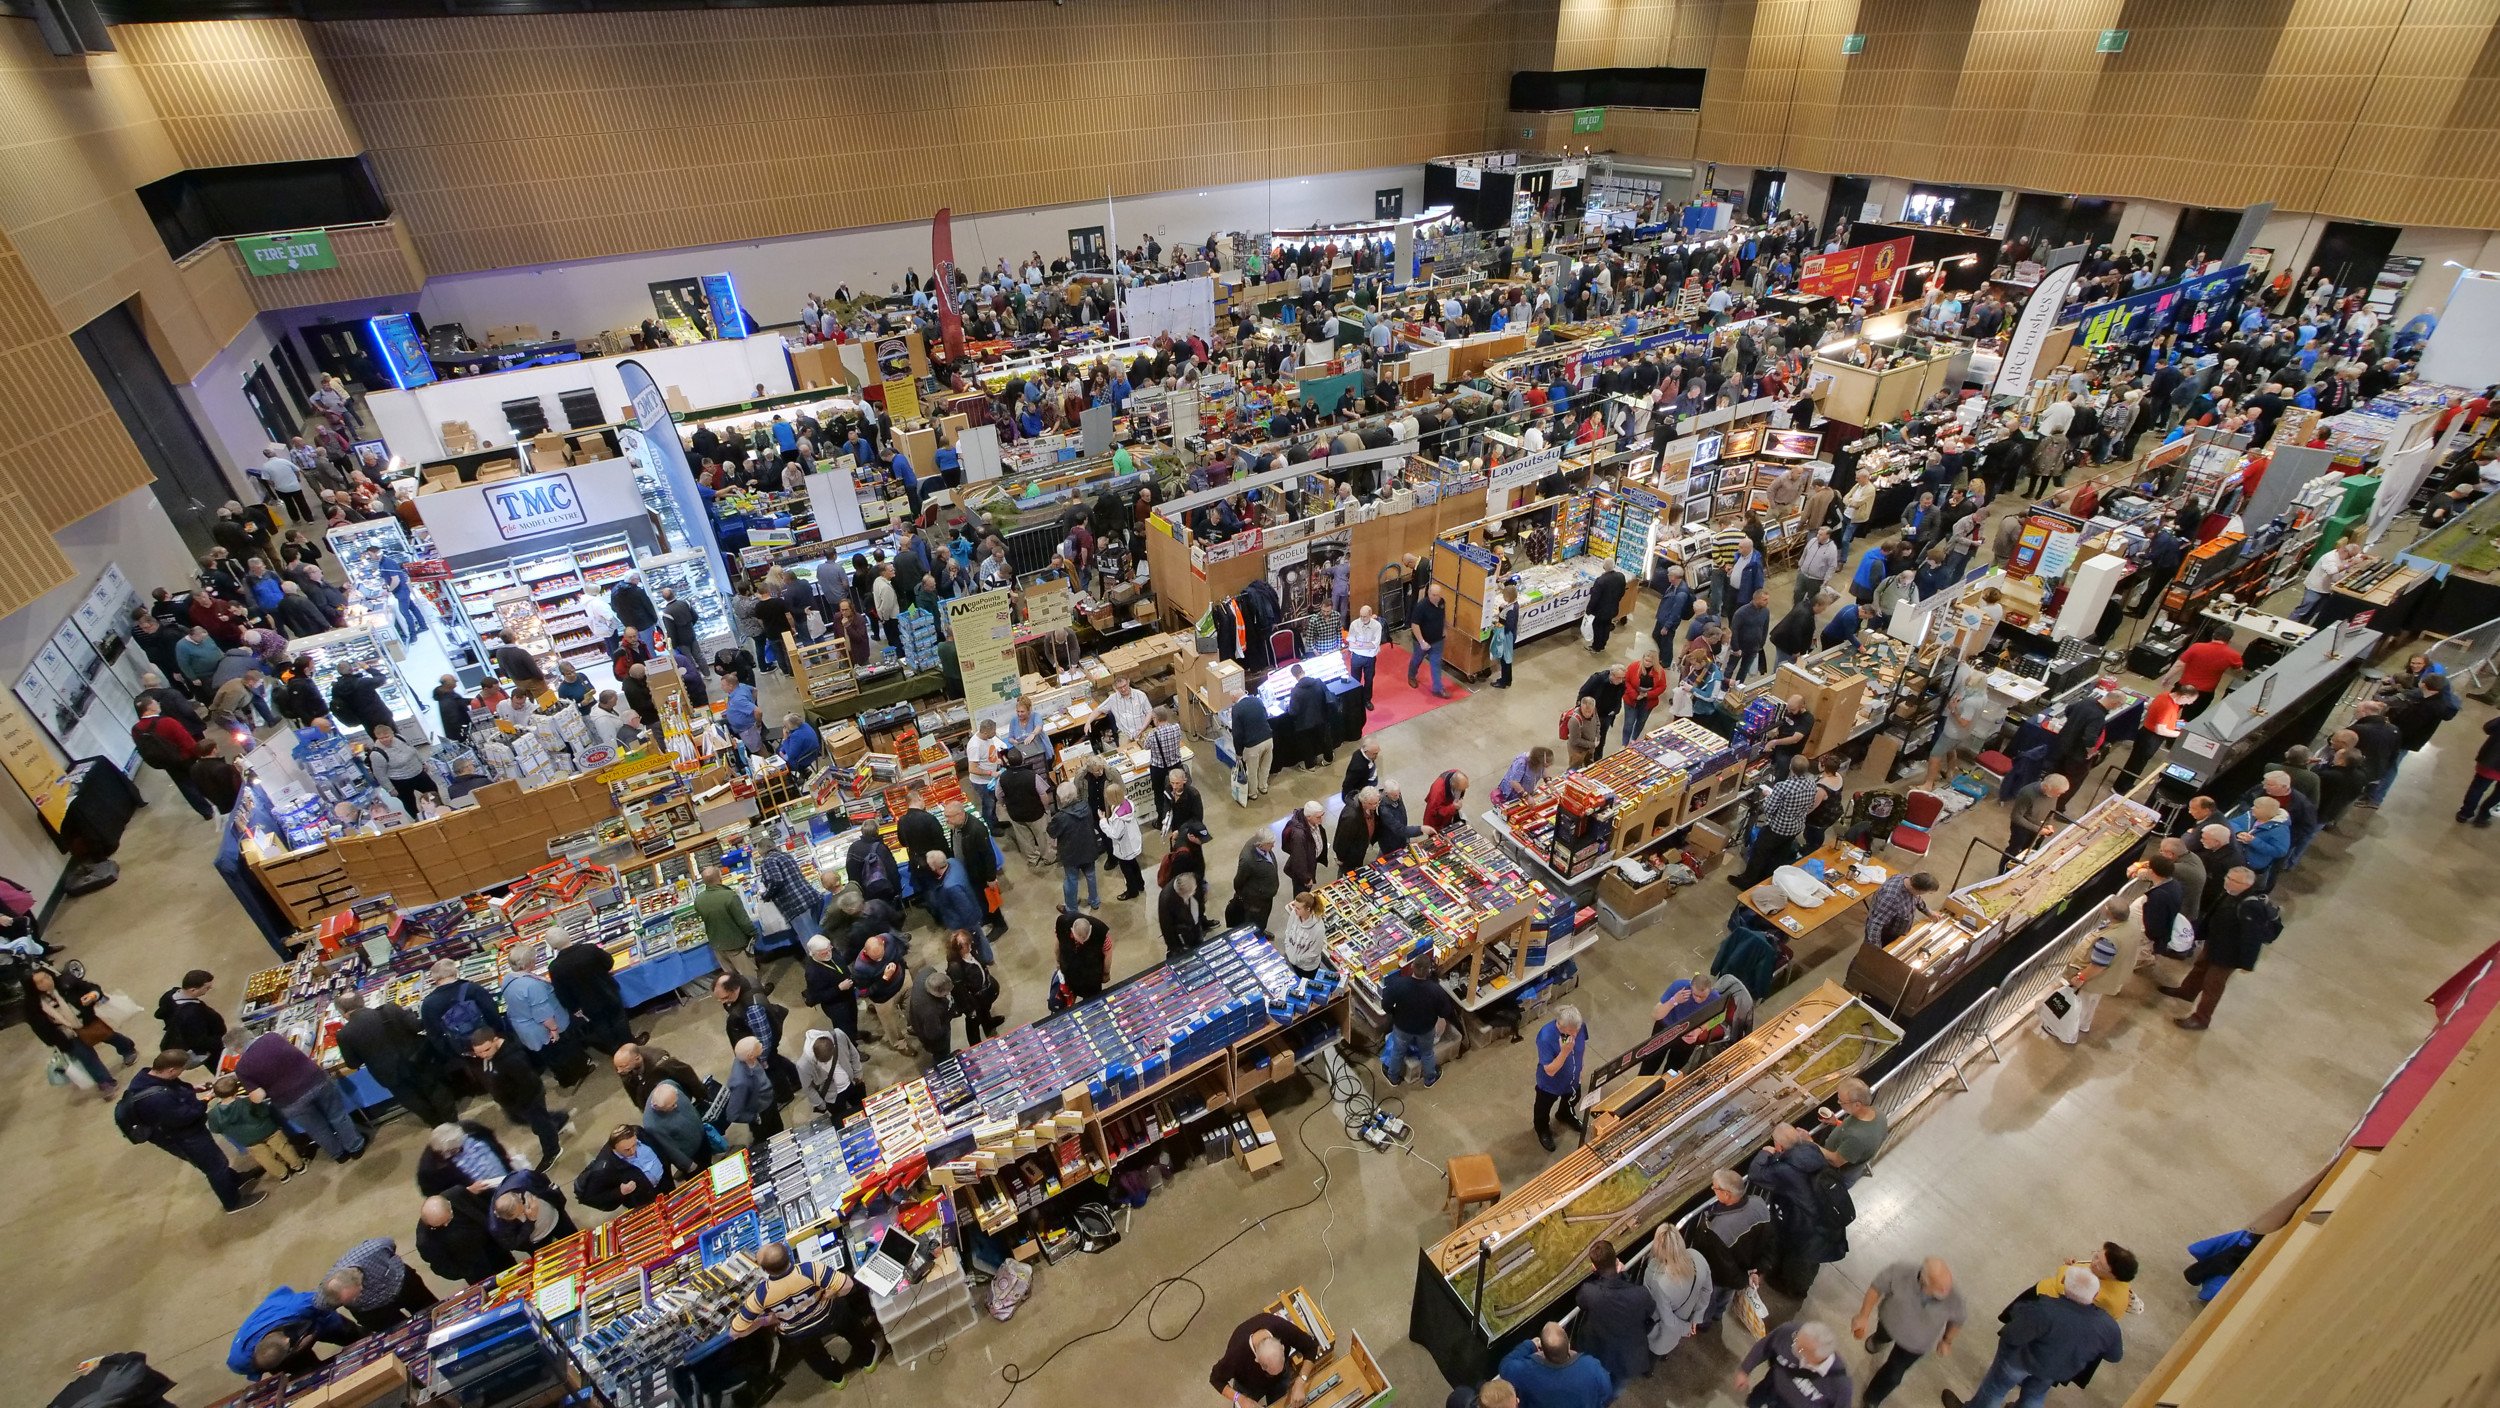 The main event hall will play host to the largest portable 'OO' gauge layout in 2023 - Pete Waterman's combination of Making Tracks 1, 2 and 3 as a single 152ft long model of the West Coast Main Line.